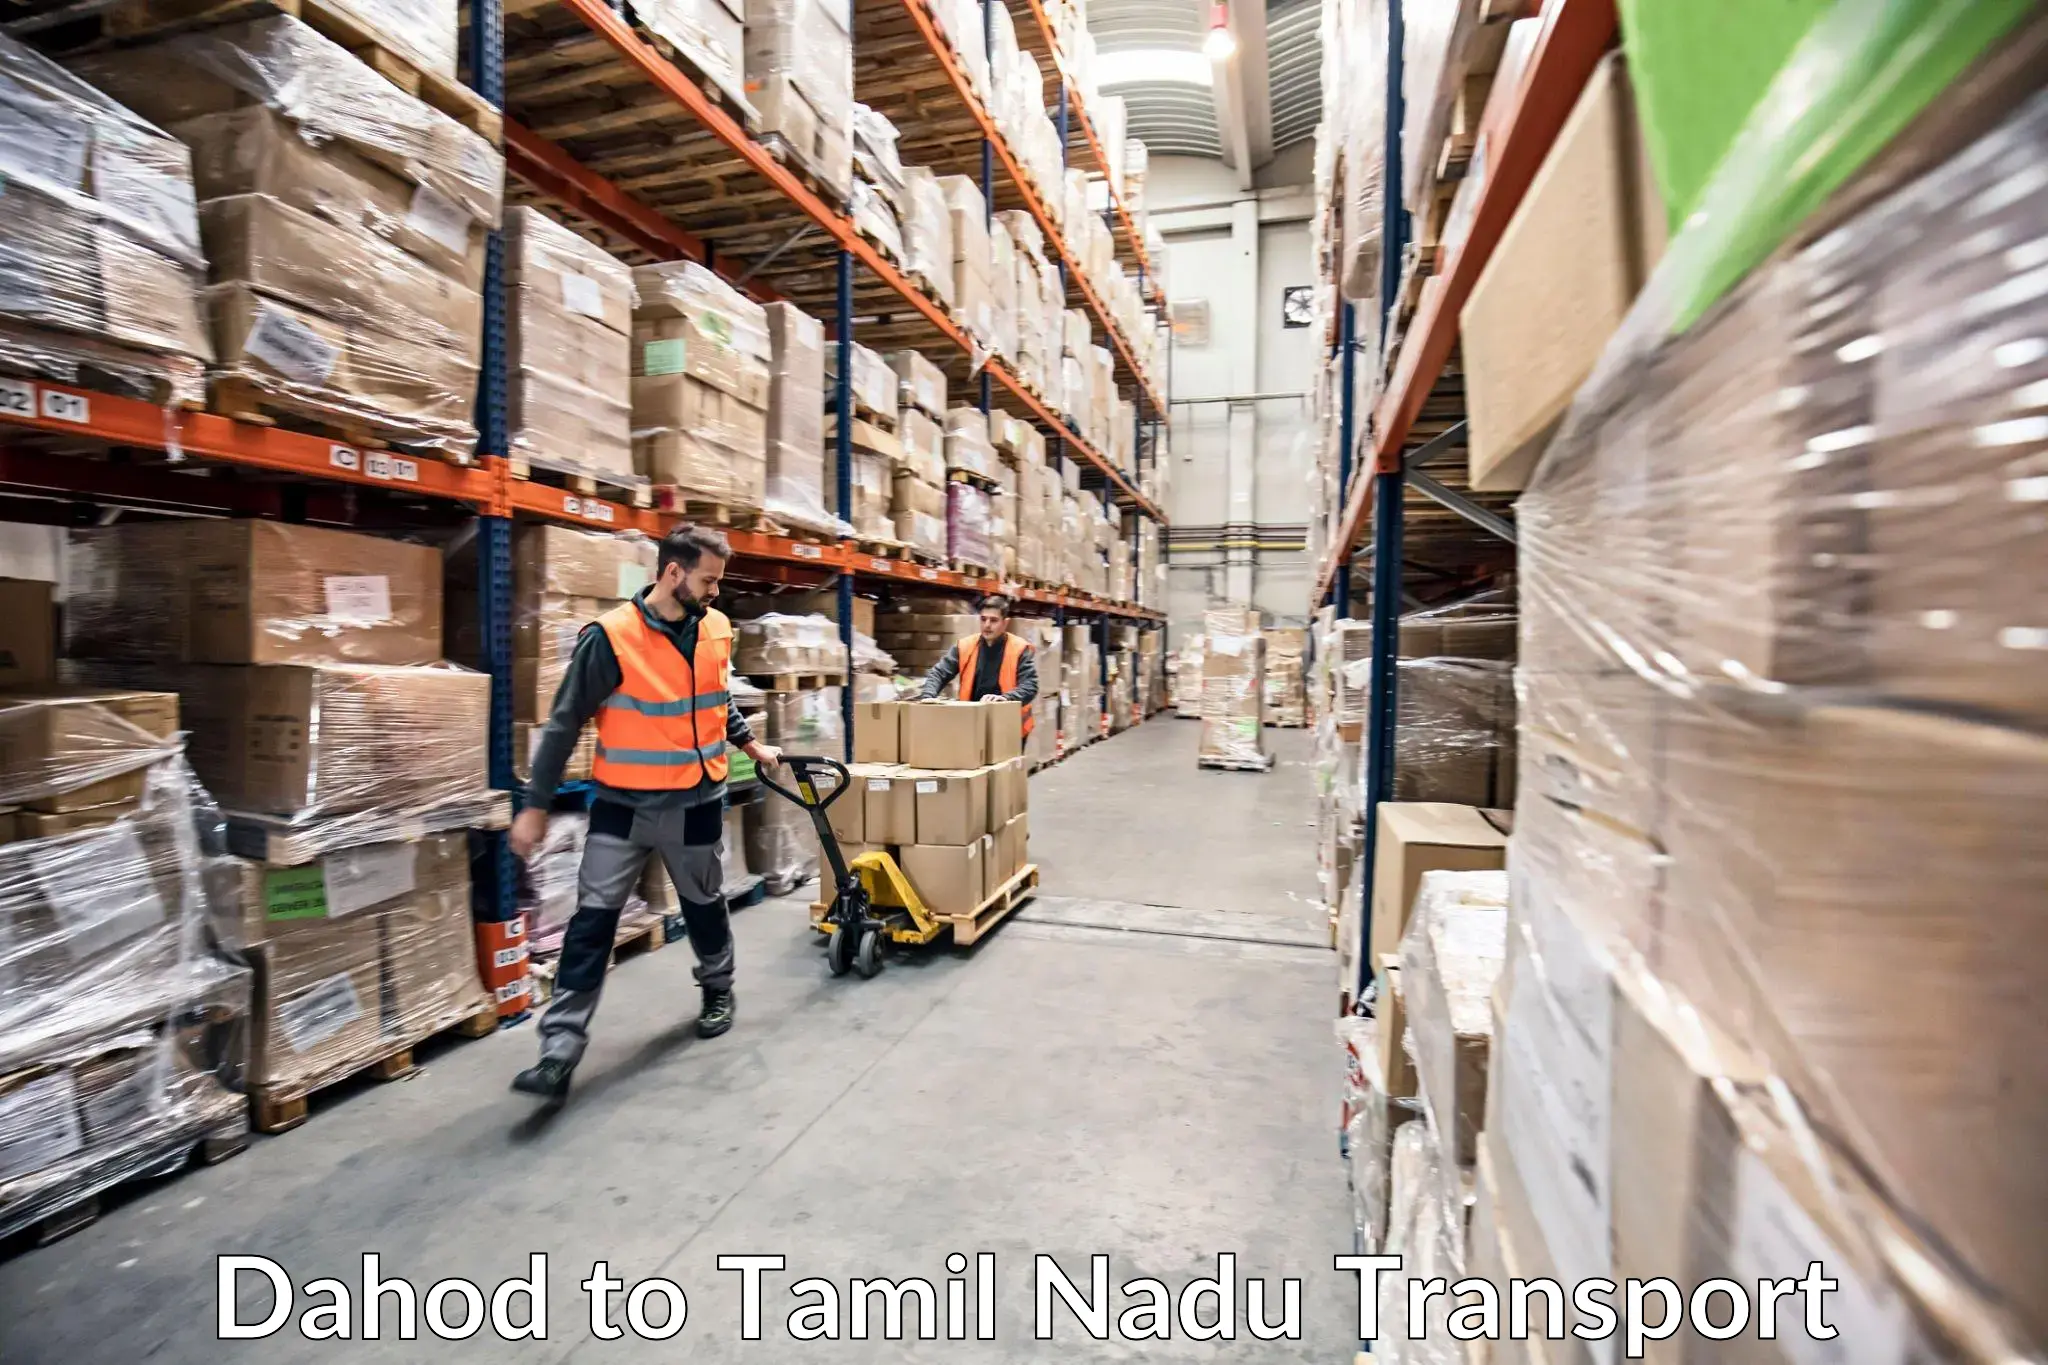 Truck transport companies in India Dahod to Ennore Port Chennai